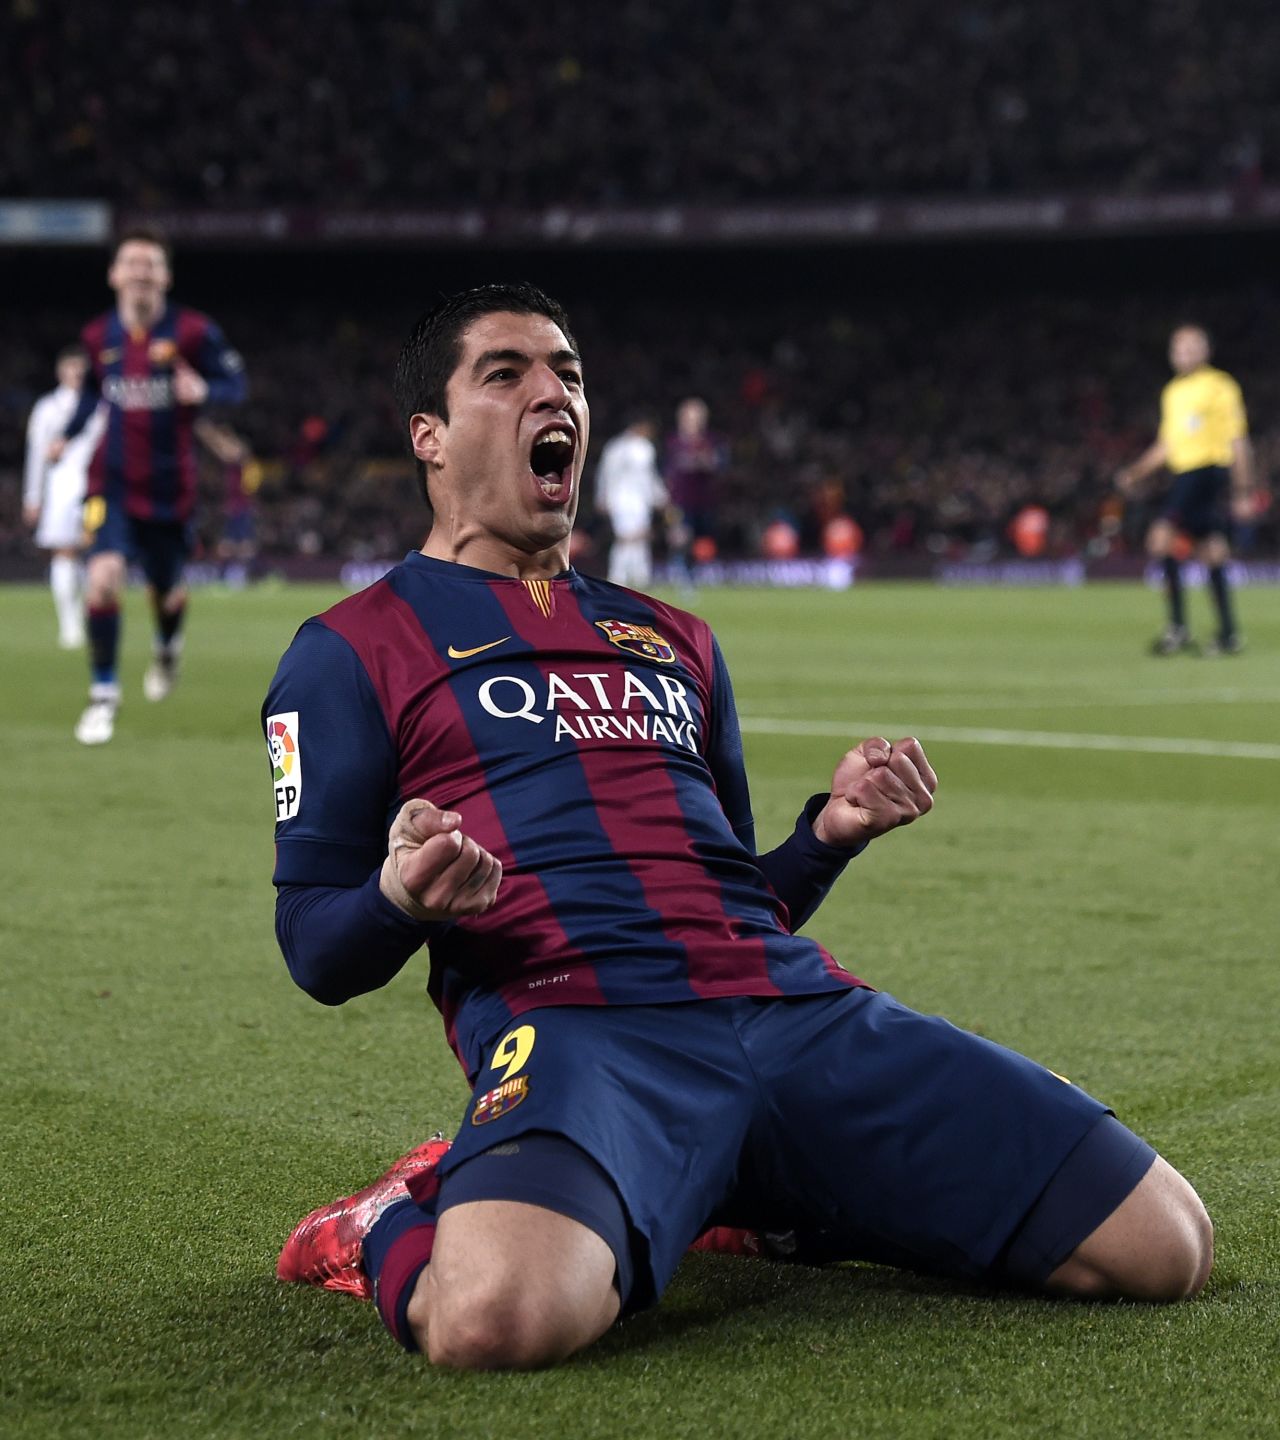 Suarez has scored 17 goals in his past 16 games after finding his feet at Barcelona following a $128 million move from Liverpool after the 2014 World Cup.